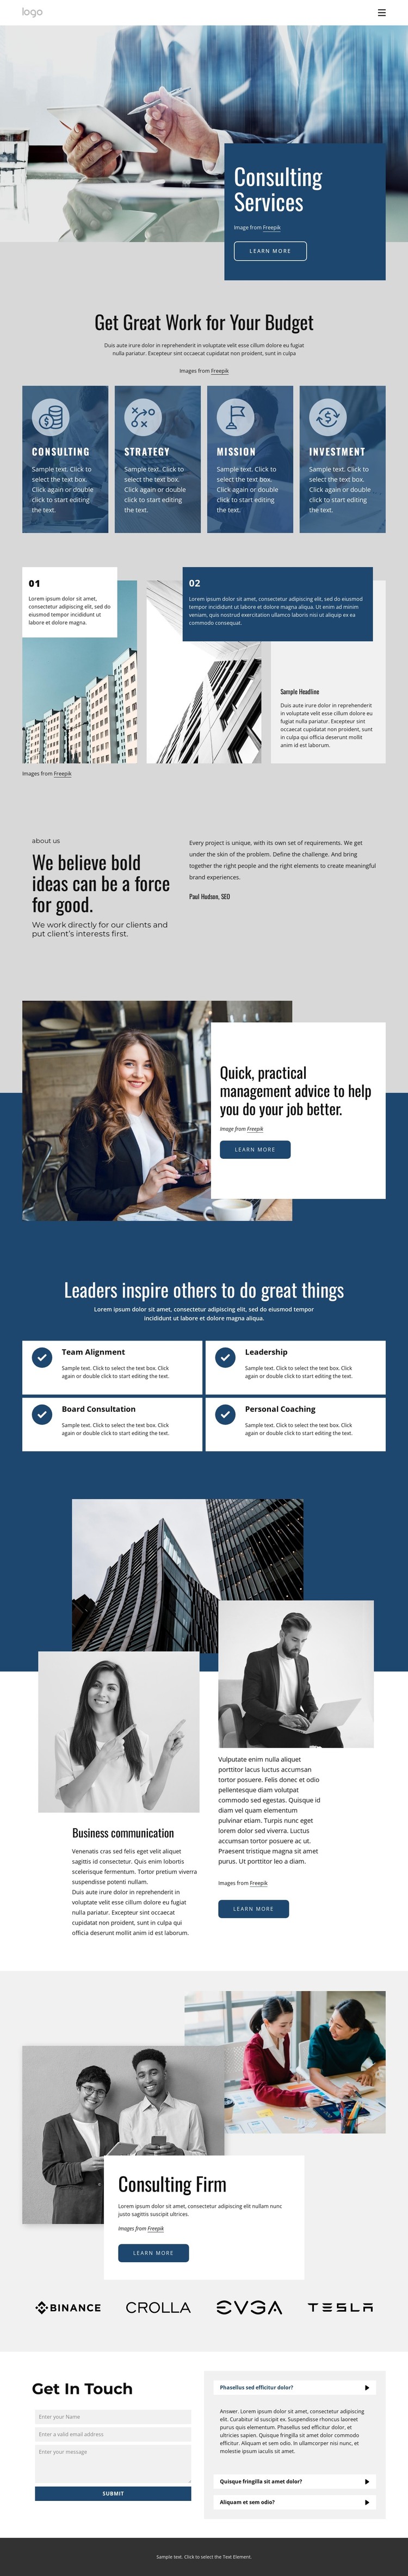 Professional consulting service firm HTML Template